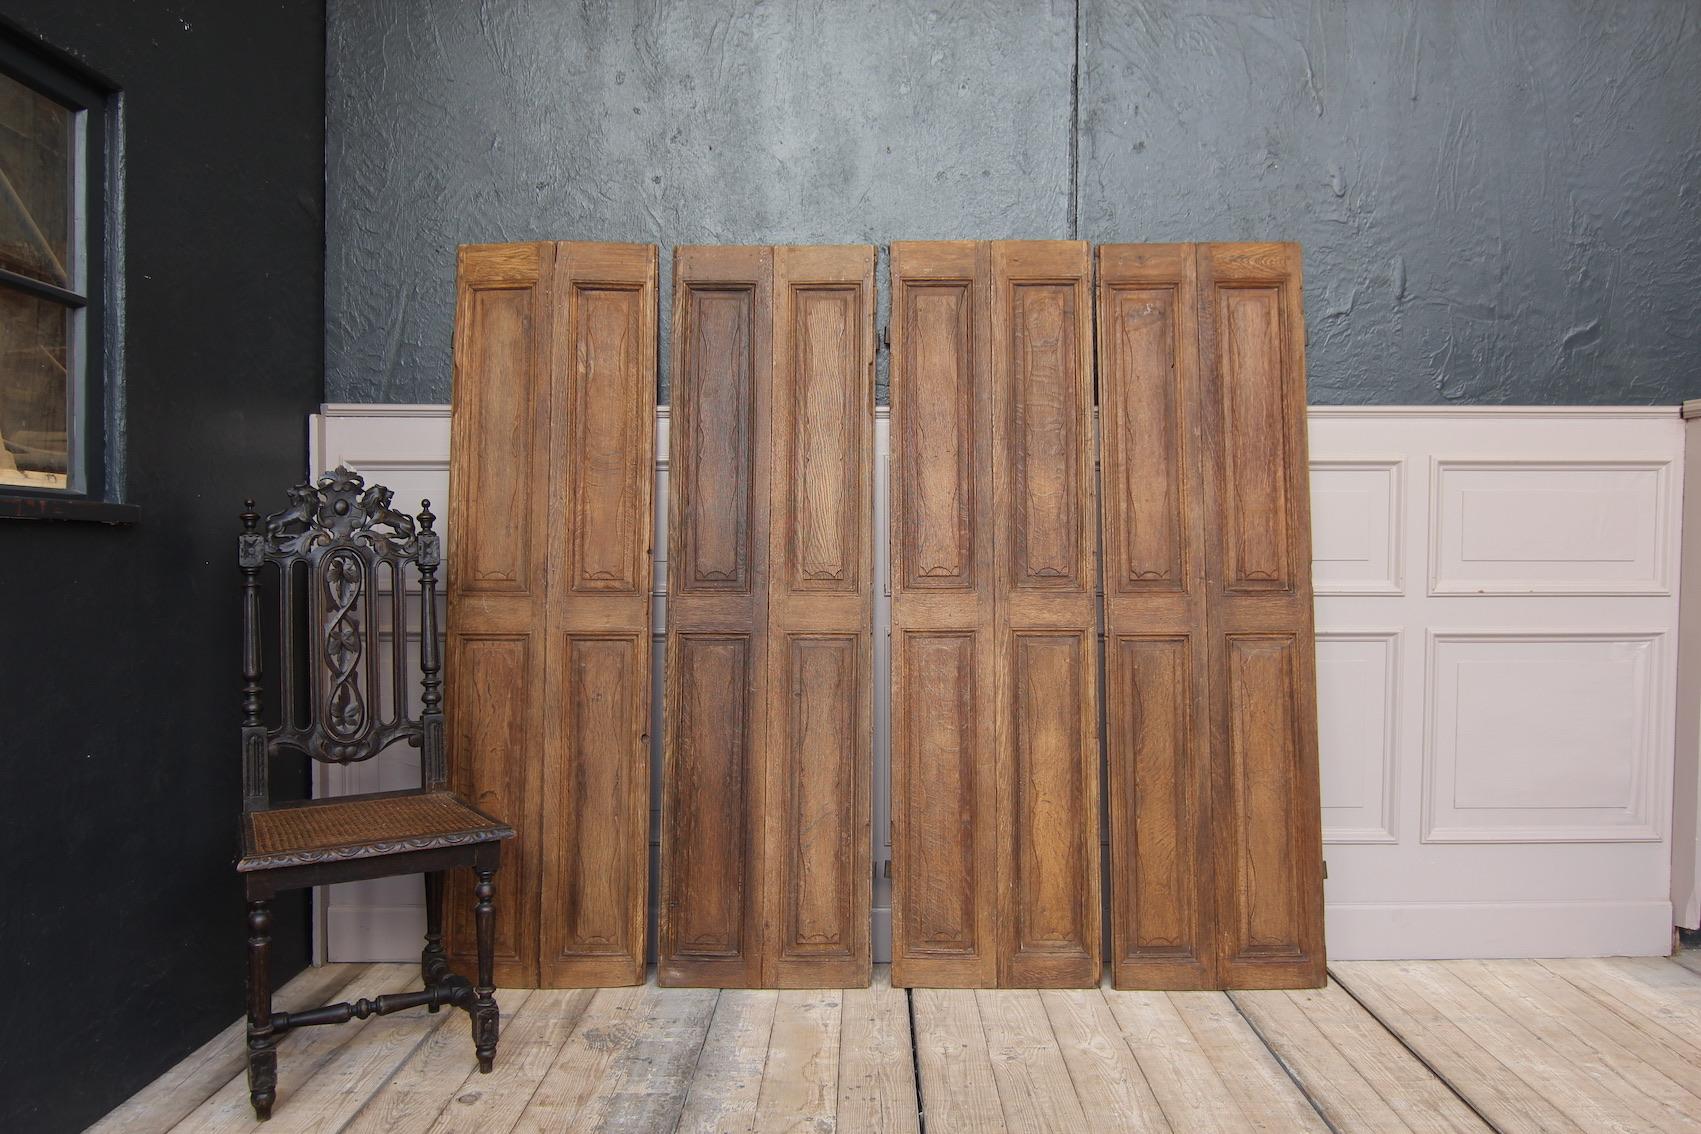 2 pairs of folding shutters. Belgian, 18th century.
Made of solid oak with panels and iron hinges.

Dimensions per piece (1 of 4 shutters): 
168 cm high / 66.14 inch high,
46.5 cm wide / 18.31 inch wide,
2 cm thick / 0.79 inch thick.
 